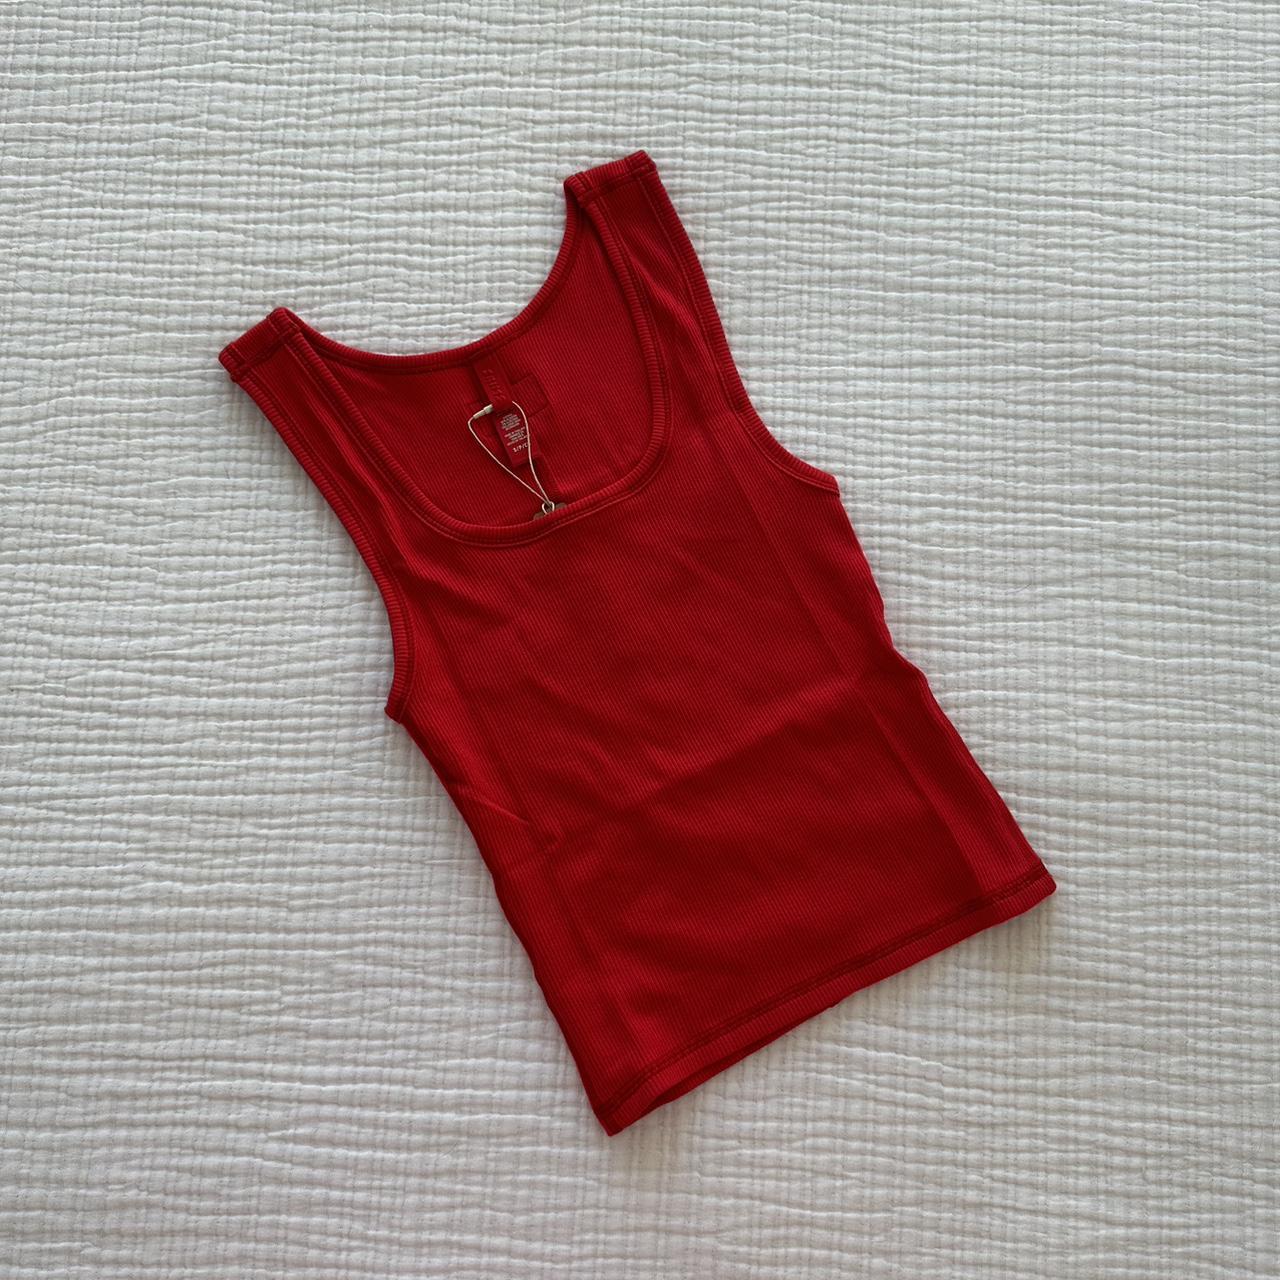 Skims Tank Top in Red